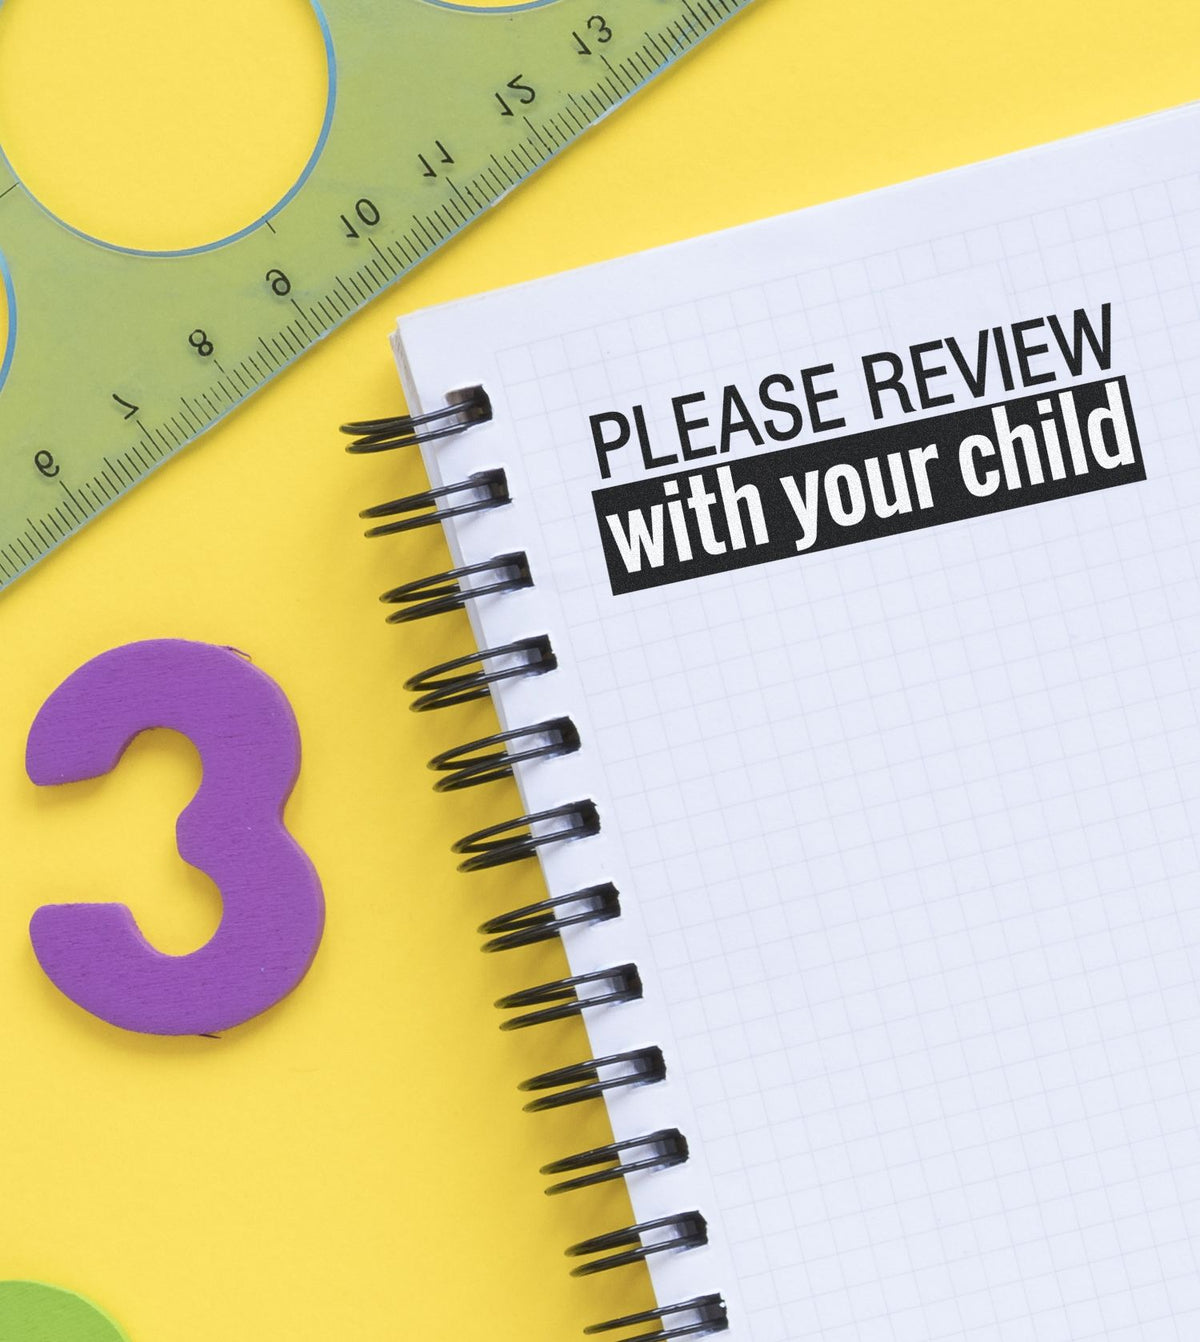 Please Review with your child Rubber Stamp Lifestyle Photo